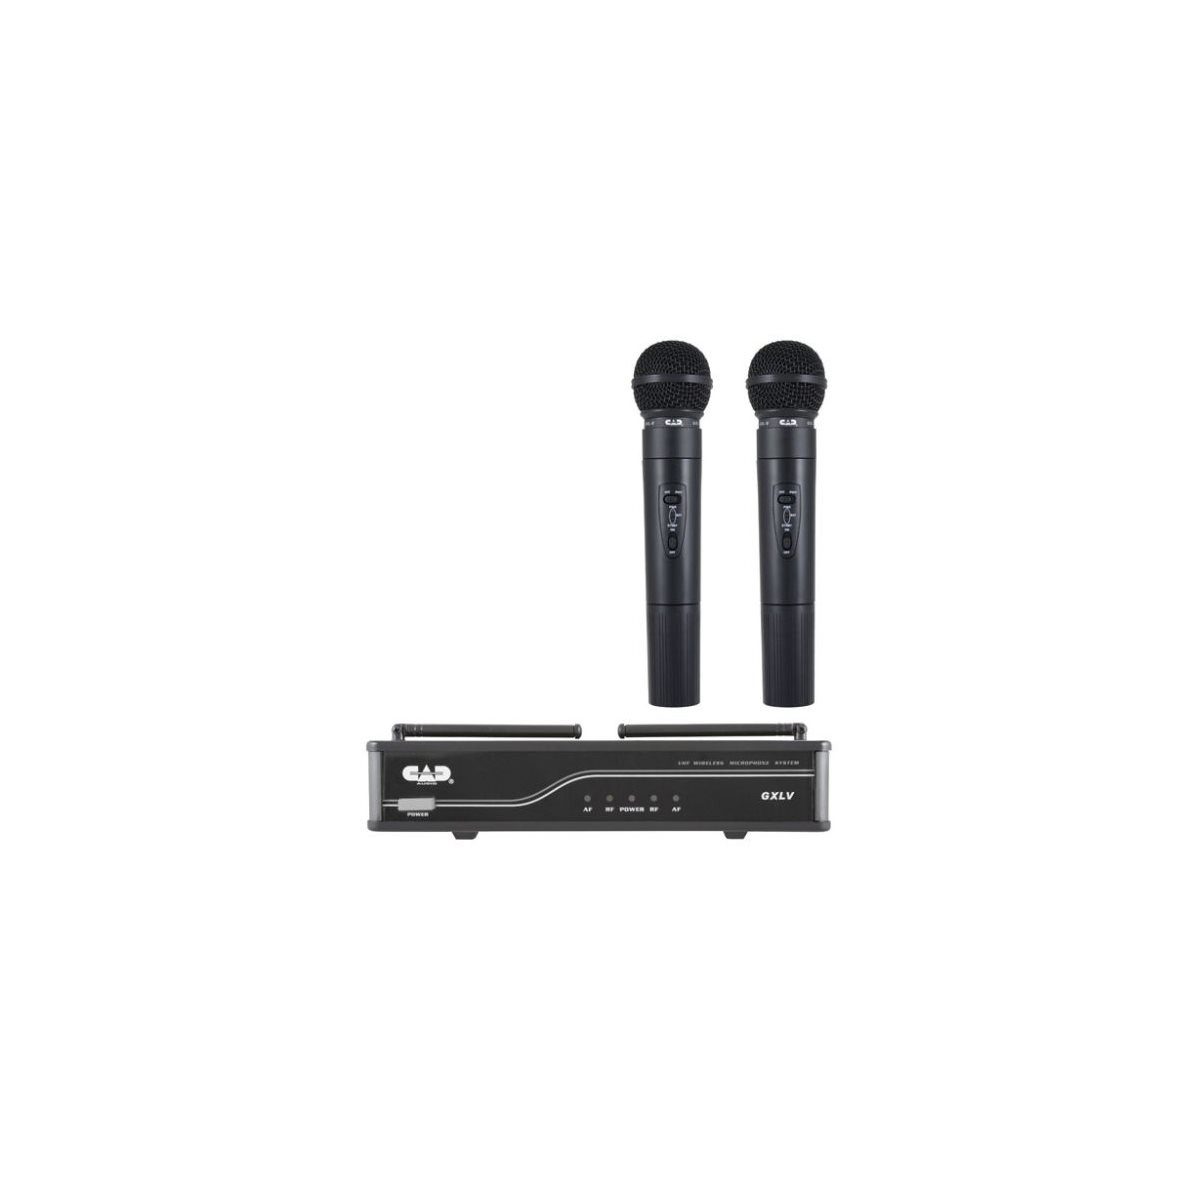 CAD - GXLVHH - 2 x Dynamic Hand-Held Microphones